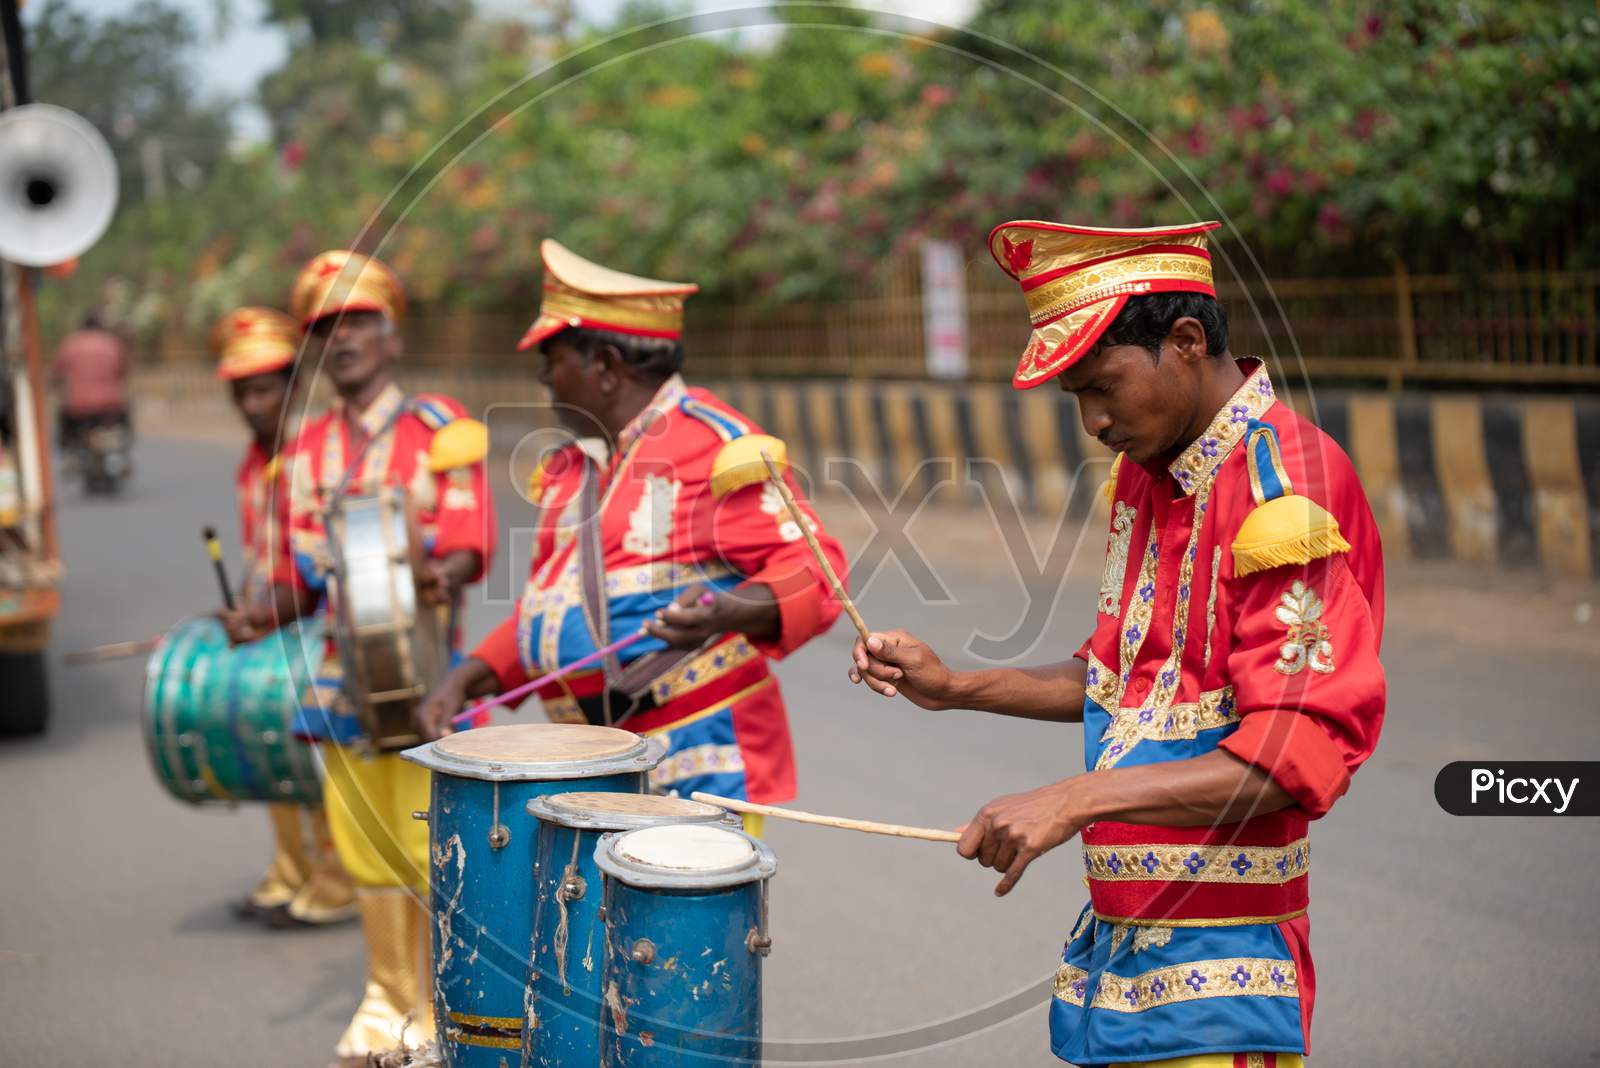 Musical Band At an Indian Wedding Ceremony